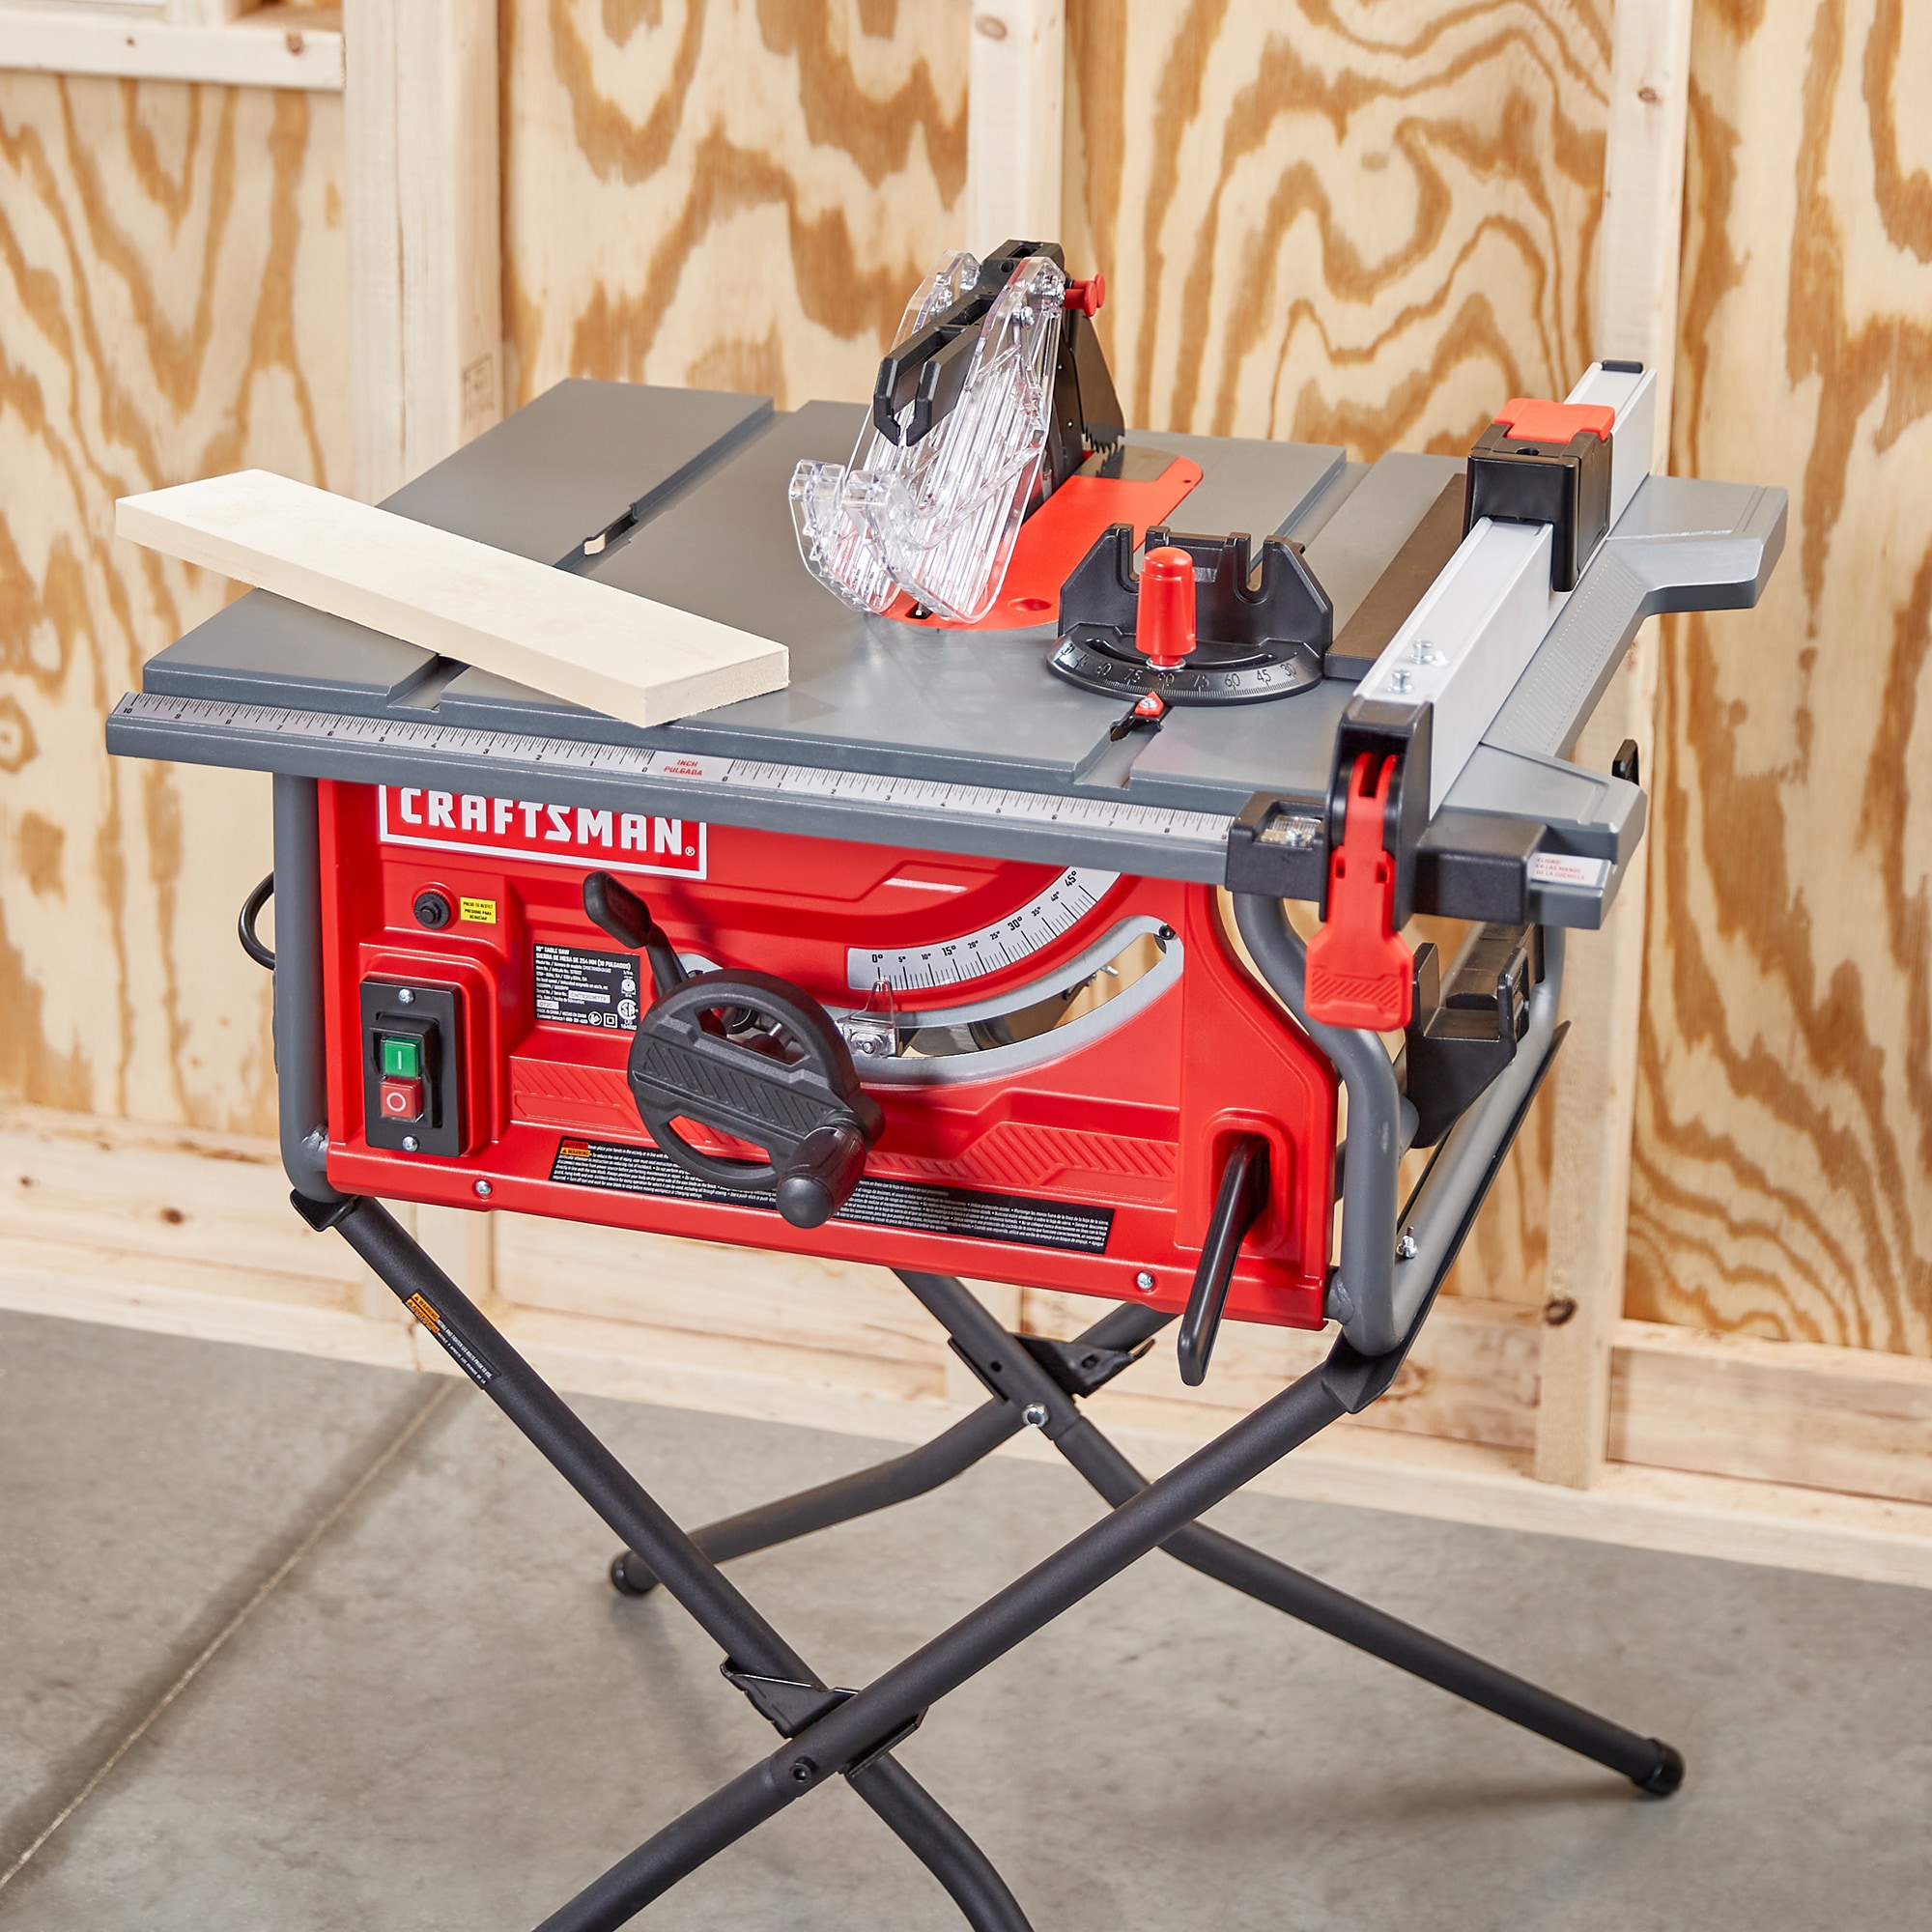 Build A Table Saw In 10 Minutes 